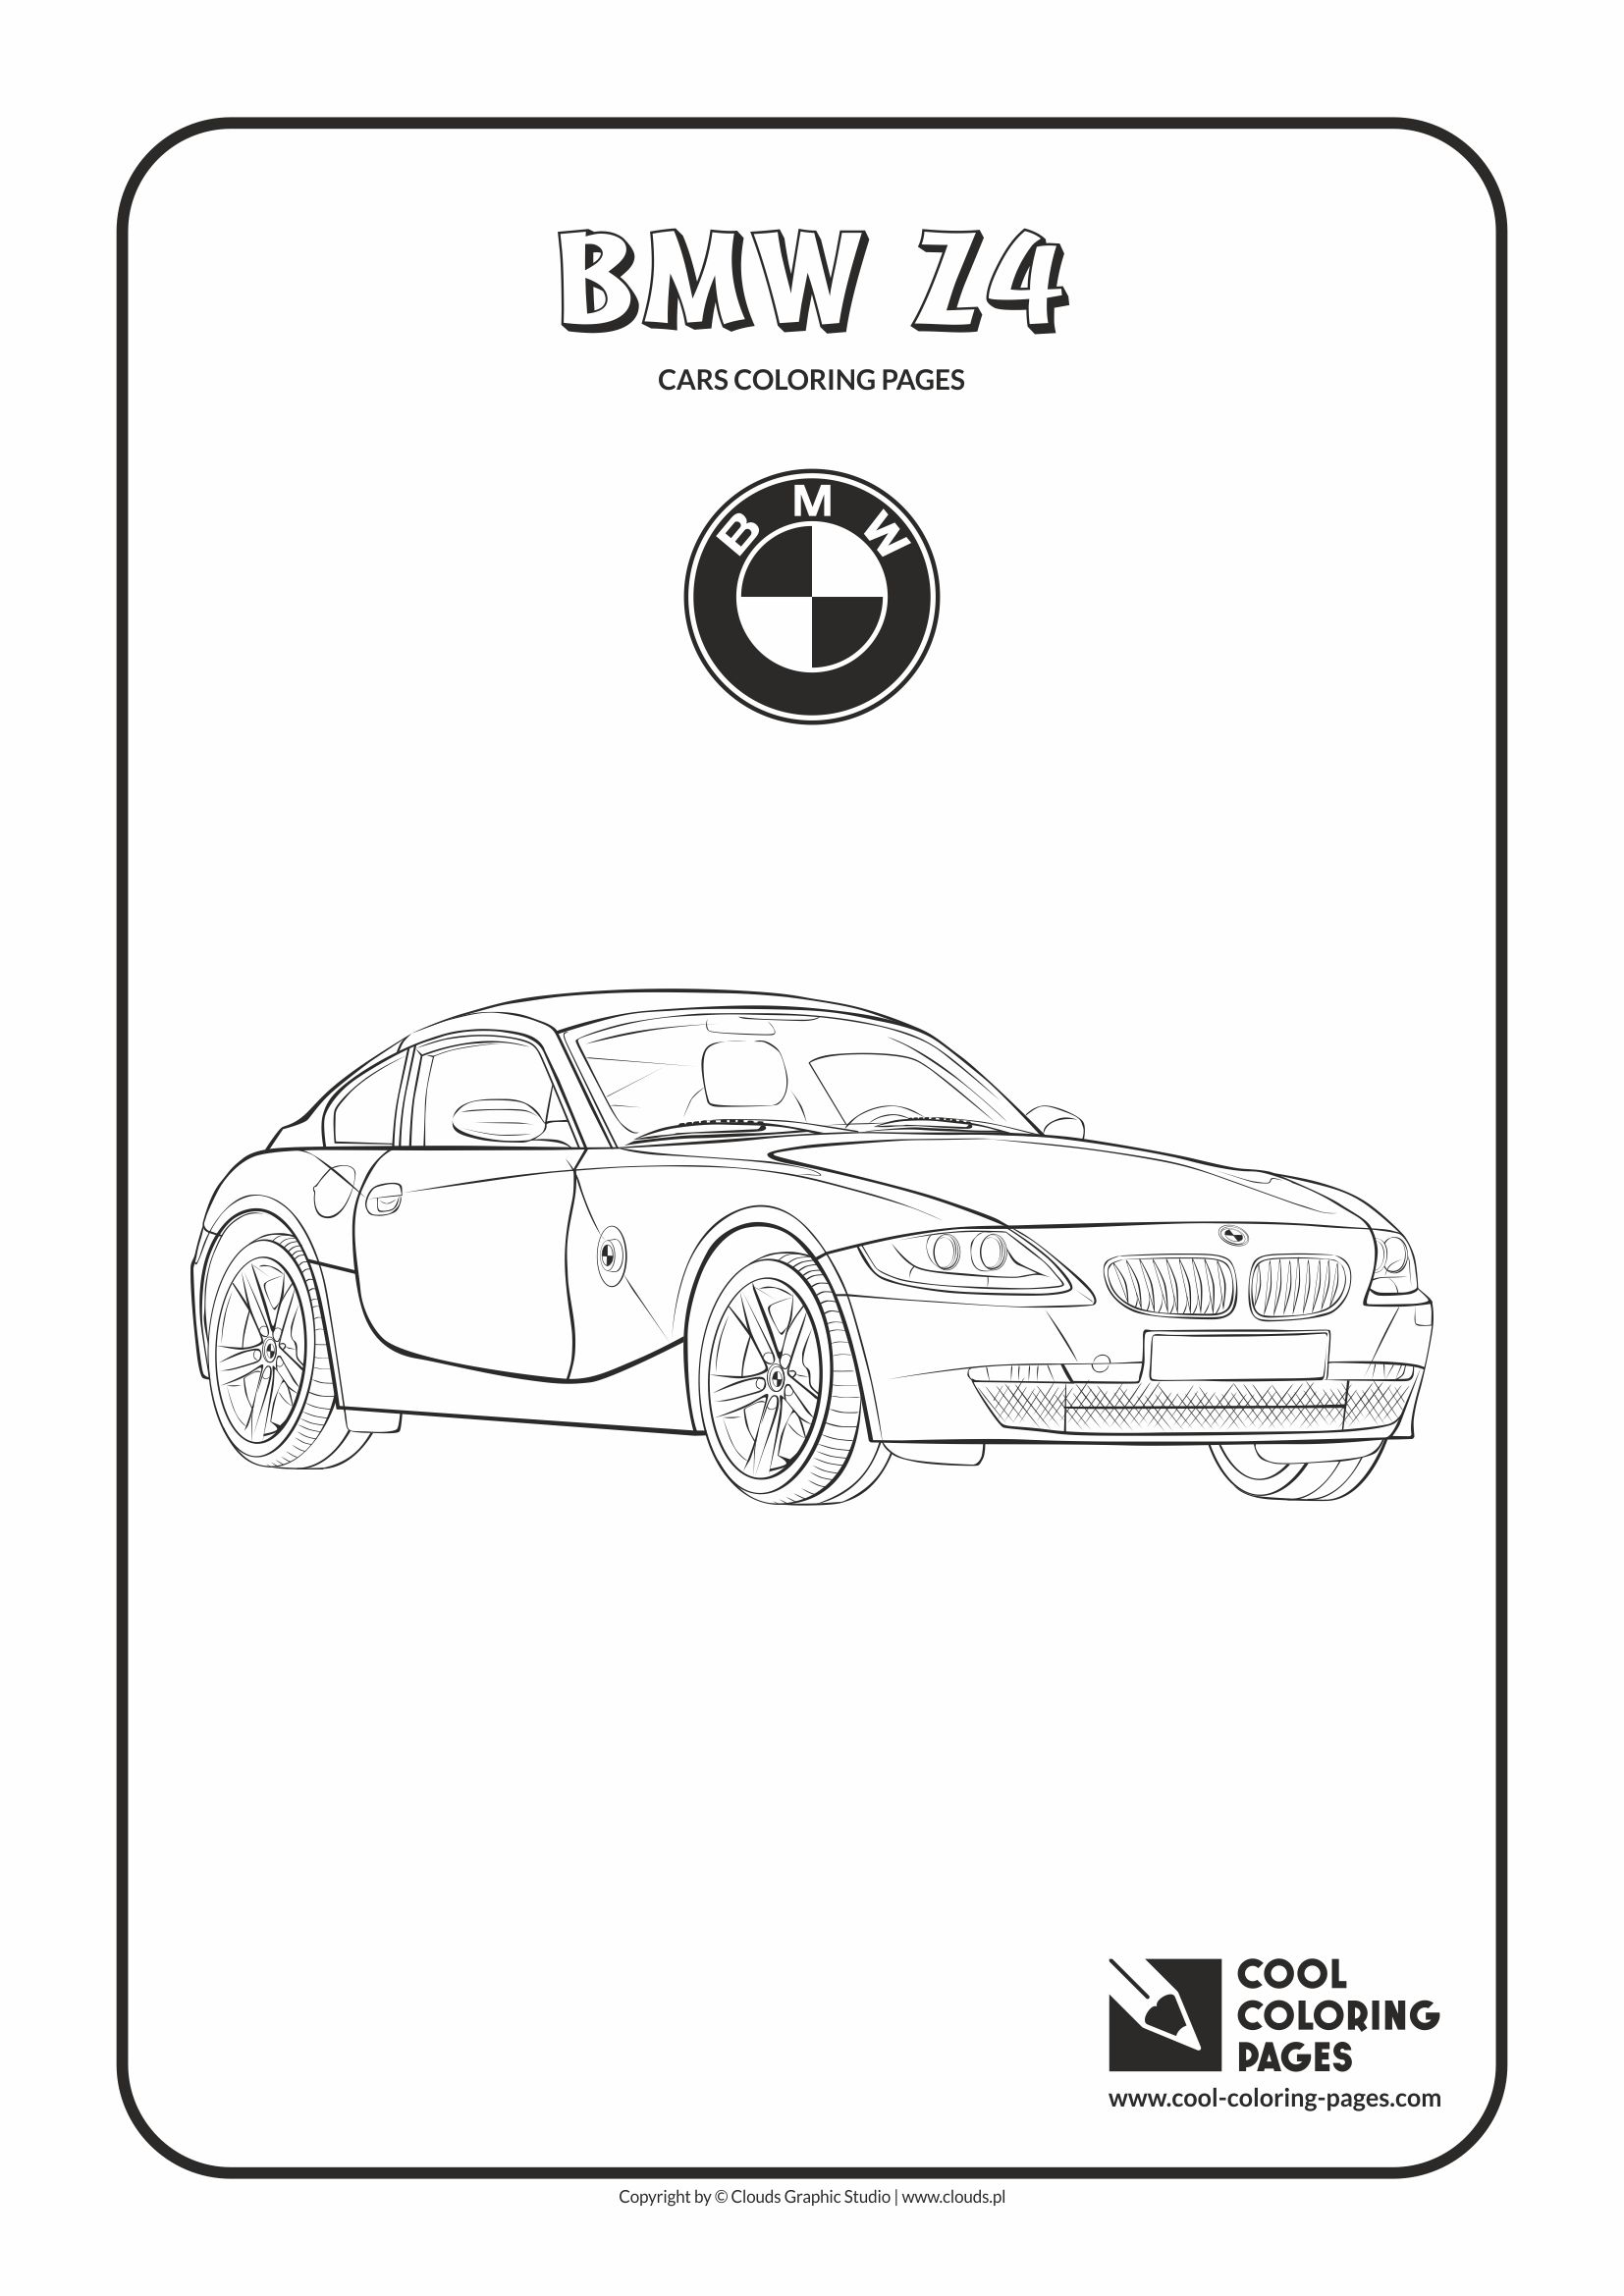 Cool Coloring Pages Cars coloring pages - Cool Coloring Pages | Free